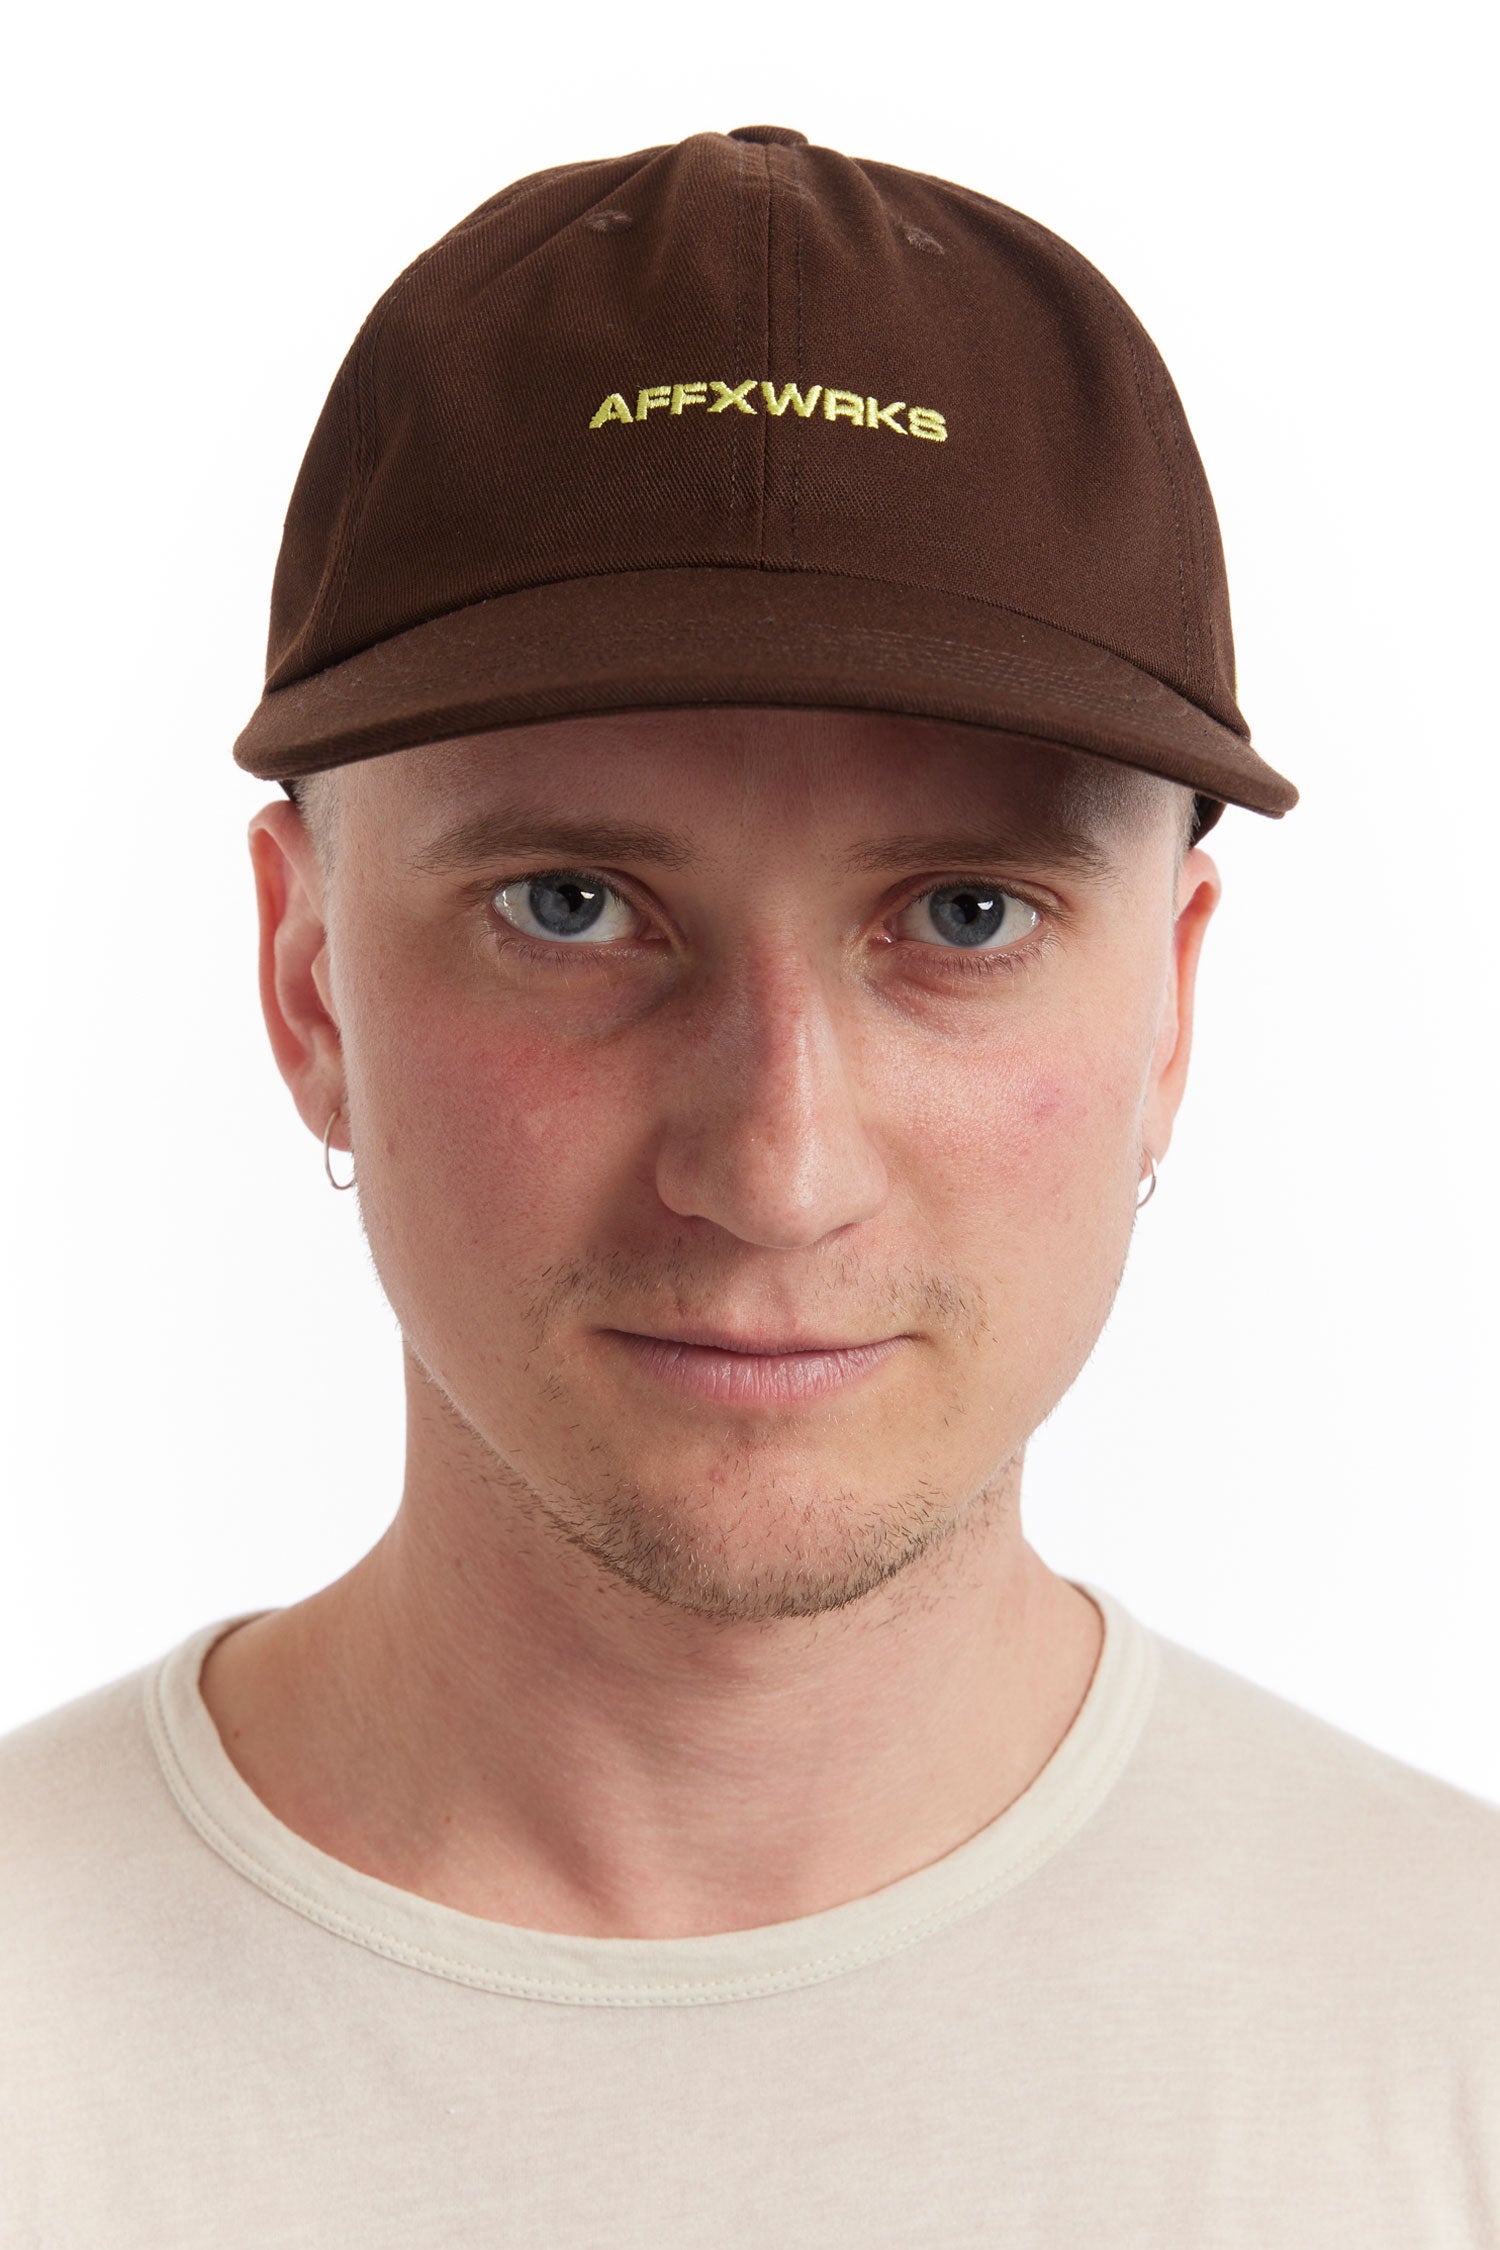 The AFFXWRKS - AFFXWRKS CAP  available online with global shipping, and in PAM Stores Melbourne and Sydney.